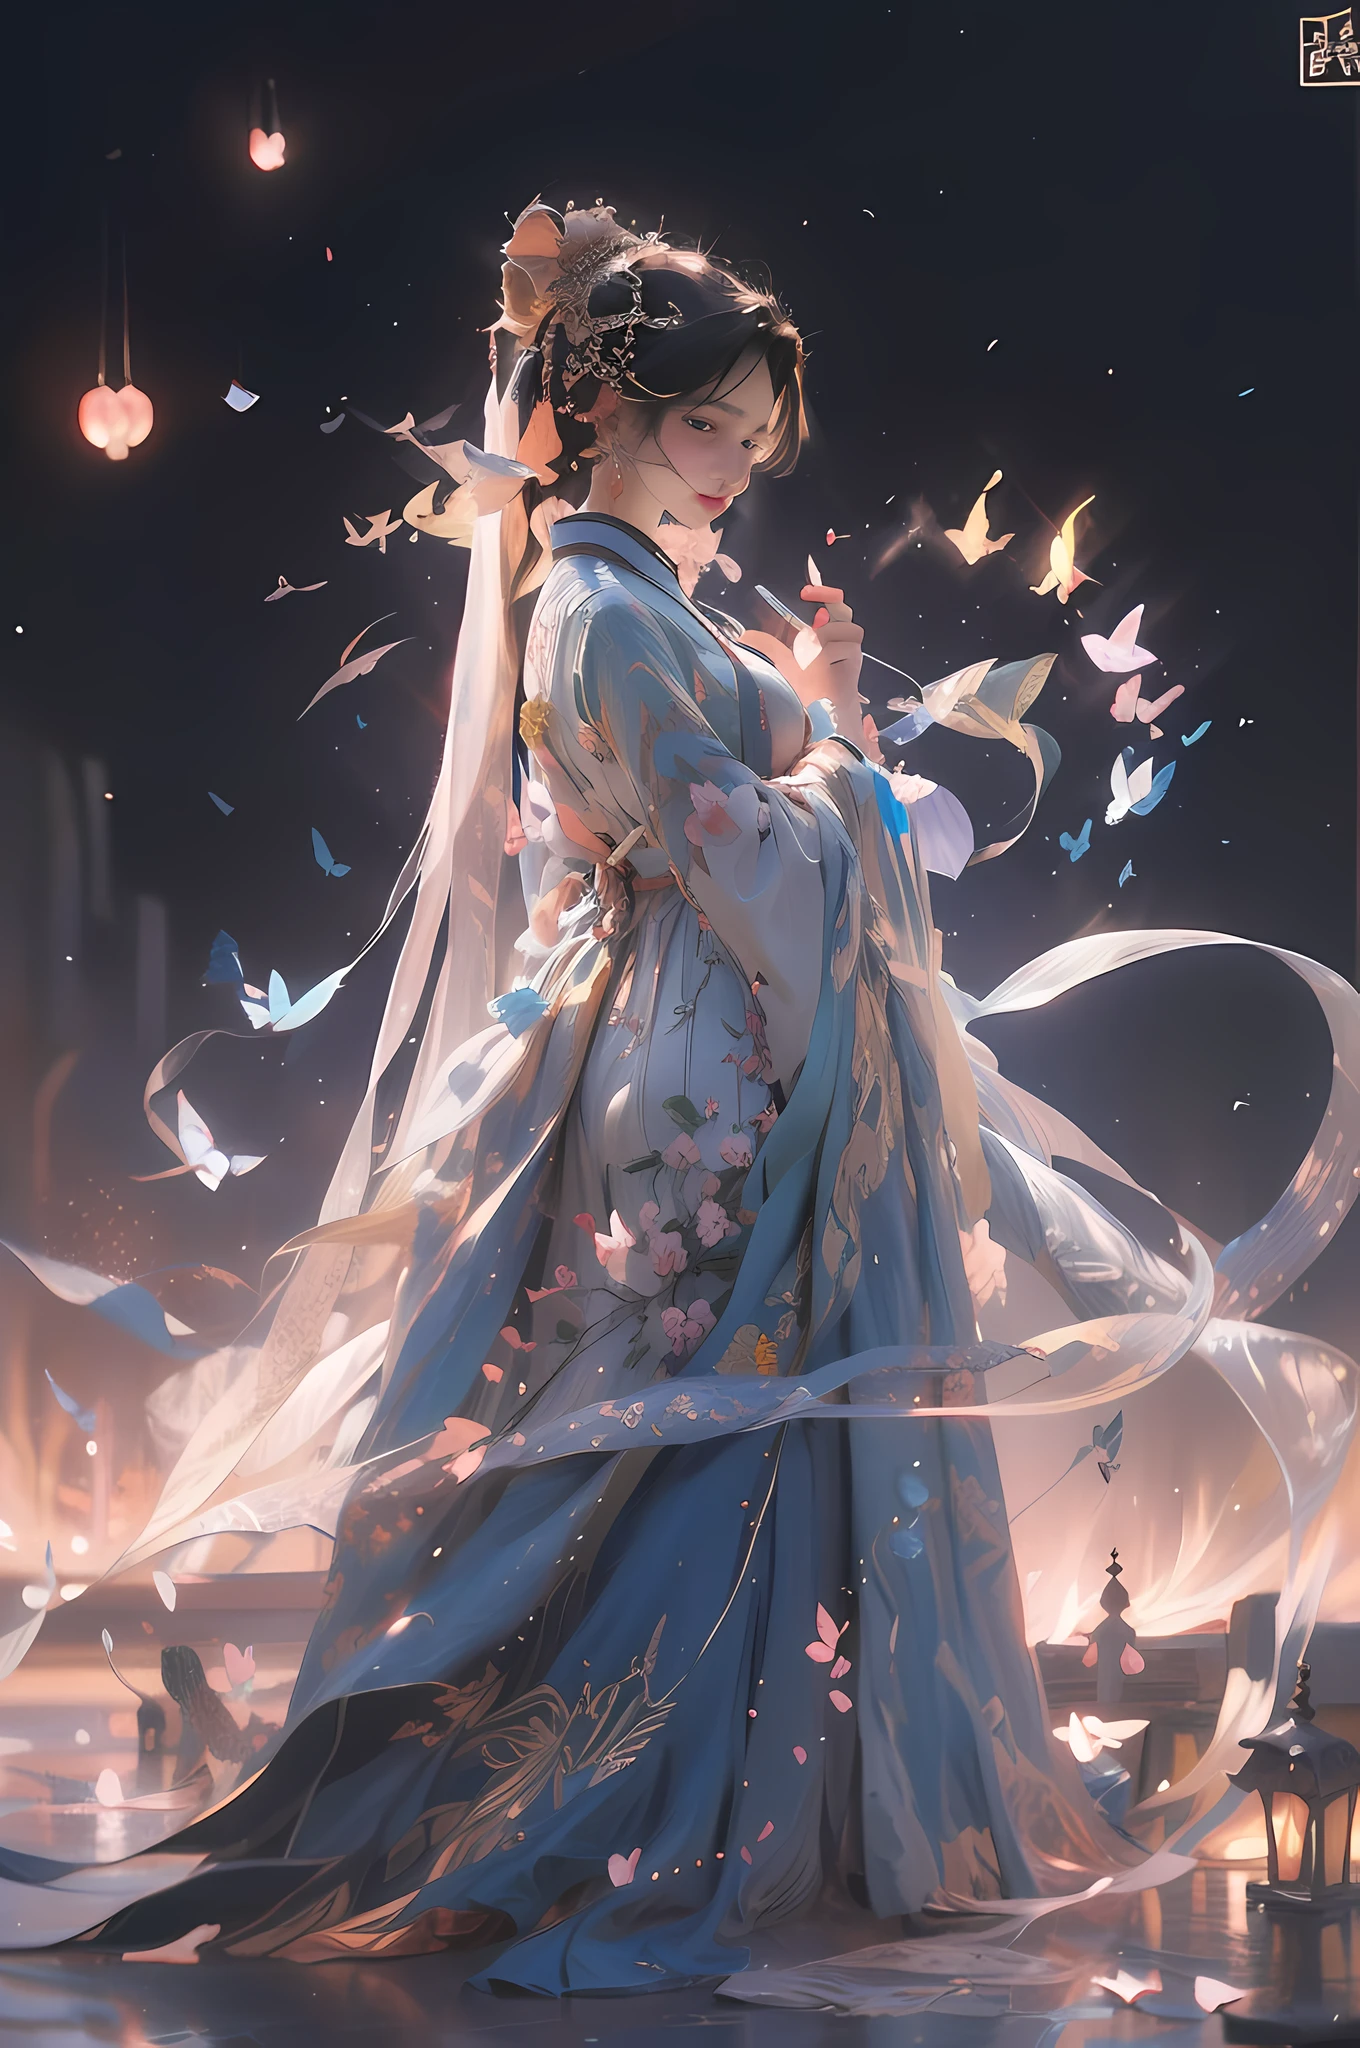 A woman in a blue dress，Holding a butterfly in his hand, A girl in Hanfu, a beautiful fantasy empress, Princesa chinesa antiga, ((a beautiful fantasy empress)), 8K high quality detailed art, China Princess, Guviz-style artwork, Chinese fantasy, A beautiful artwork illustration, Guviz, Beautiful digital artwork